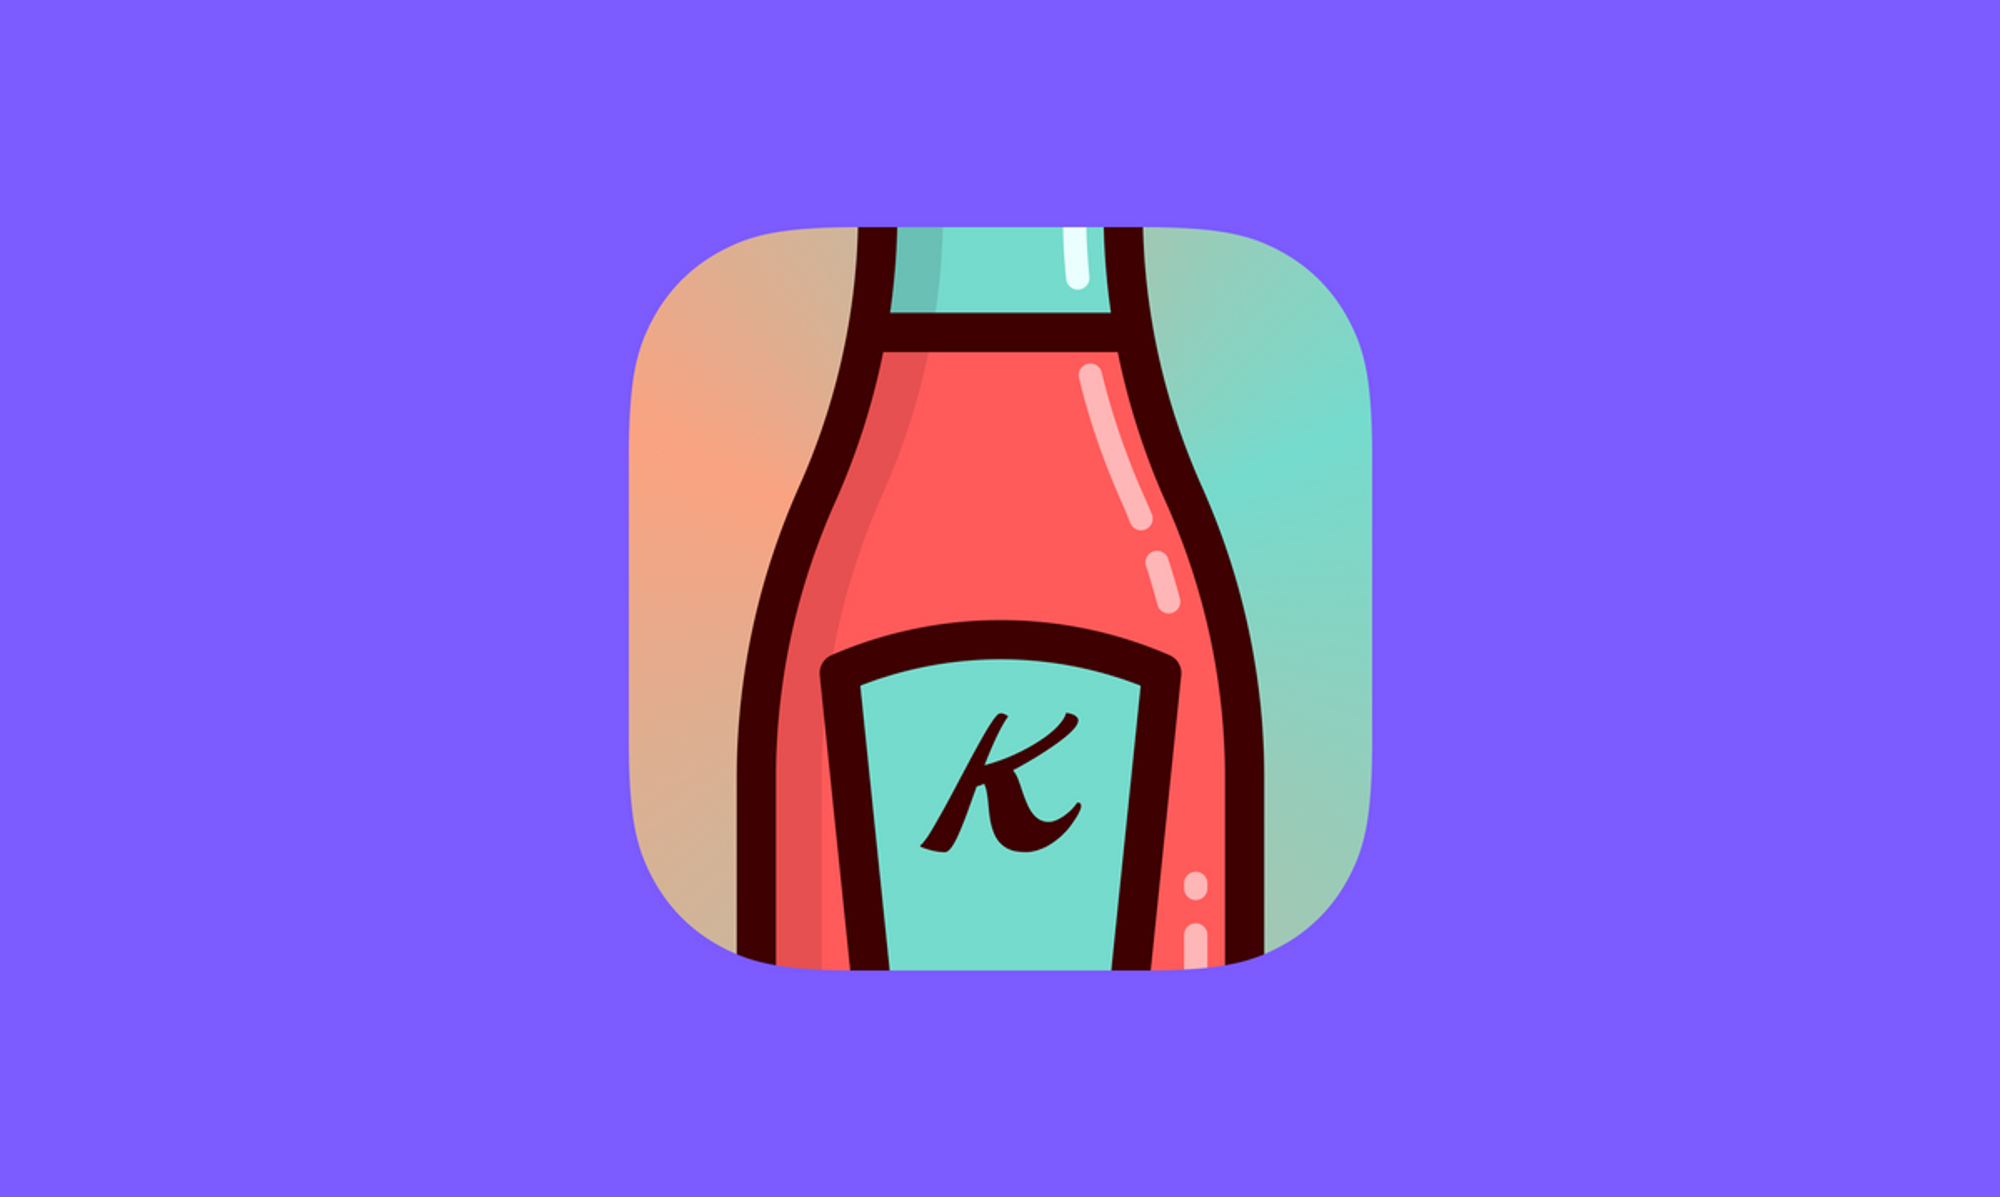 Launched Ketchup to help people stay in touch with friends and family during COVID-19